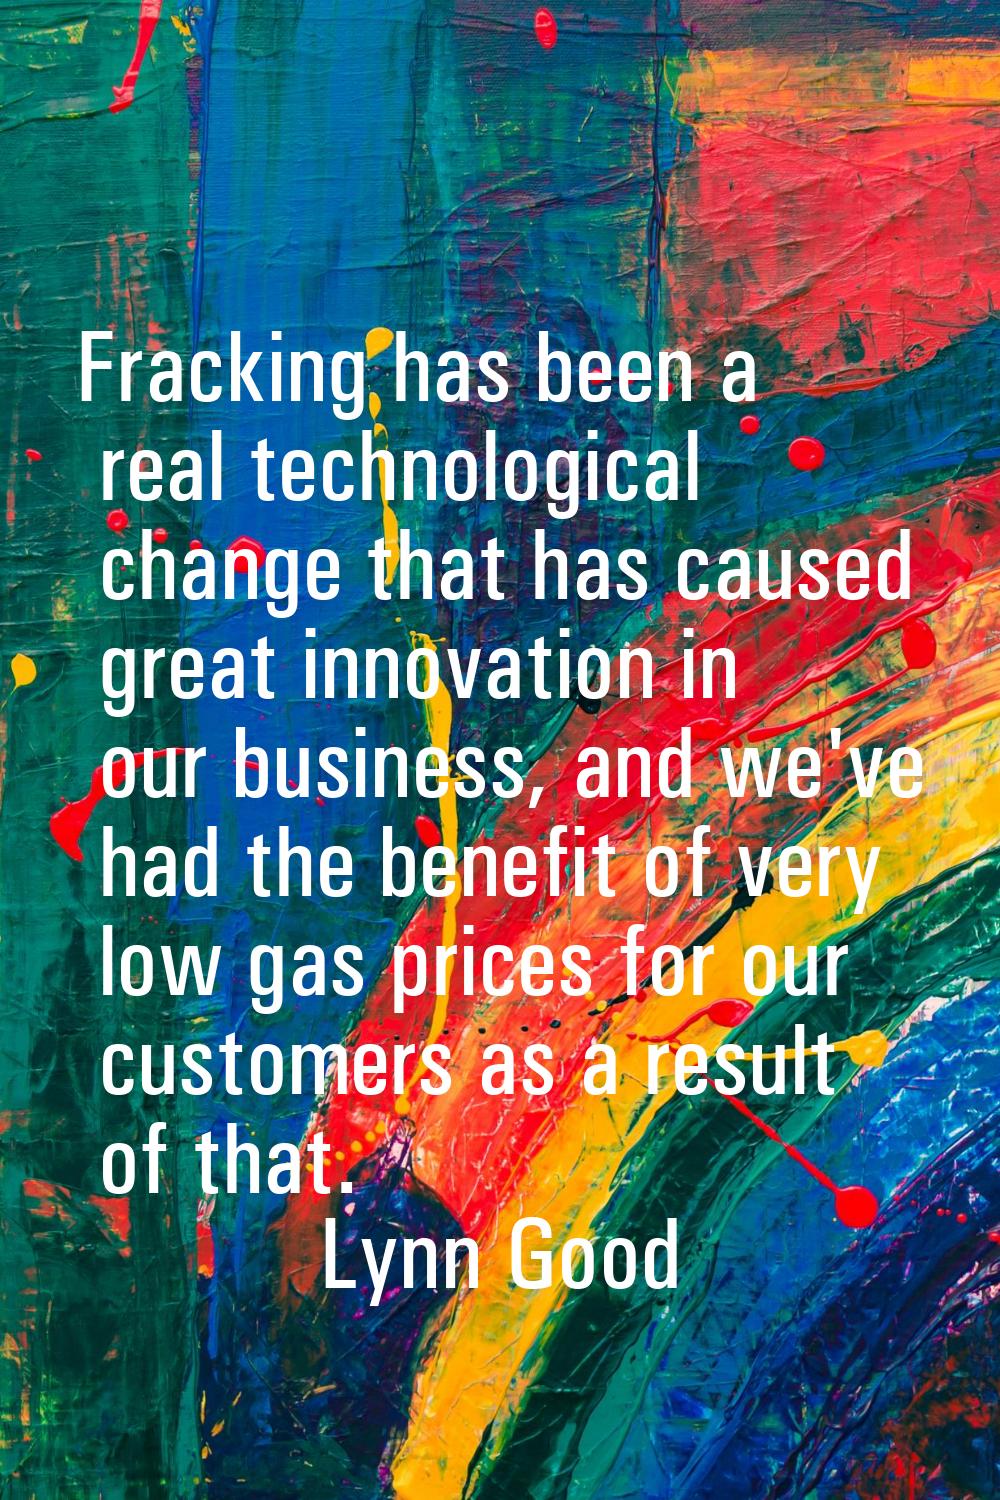 Fracking has been a real technological change that has caused great innovation in our business, and